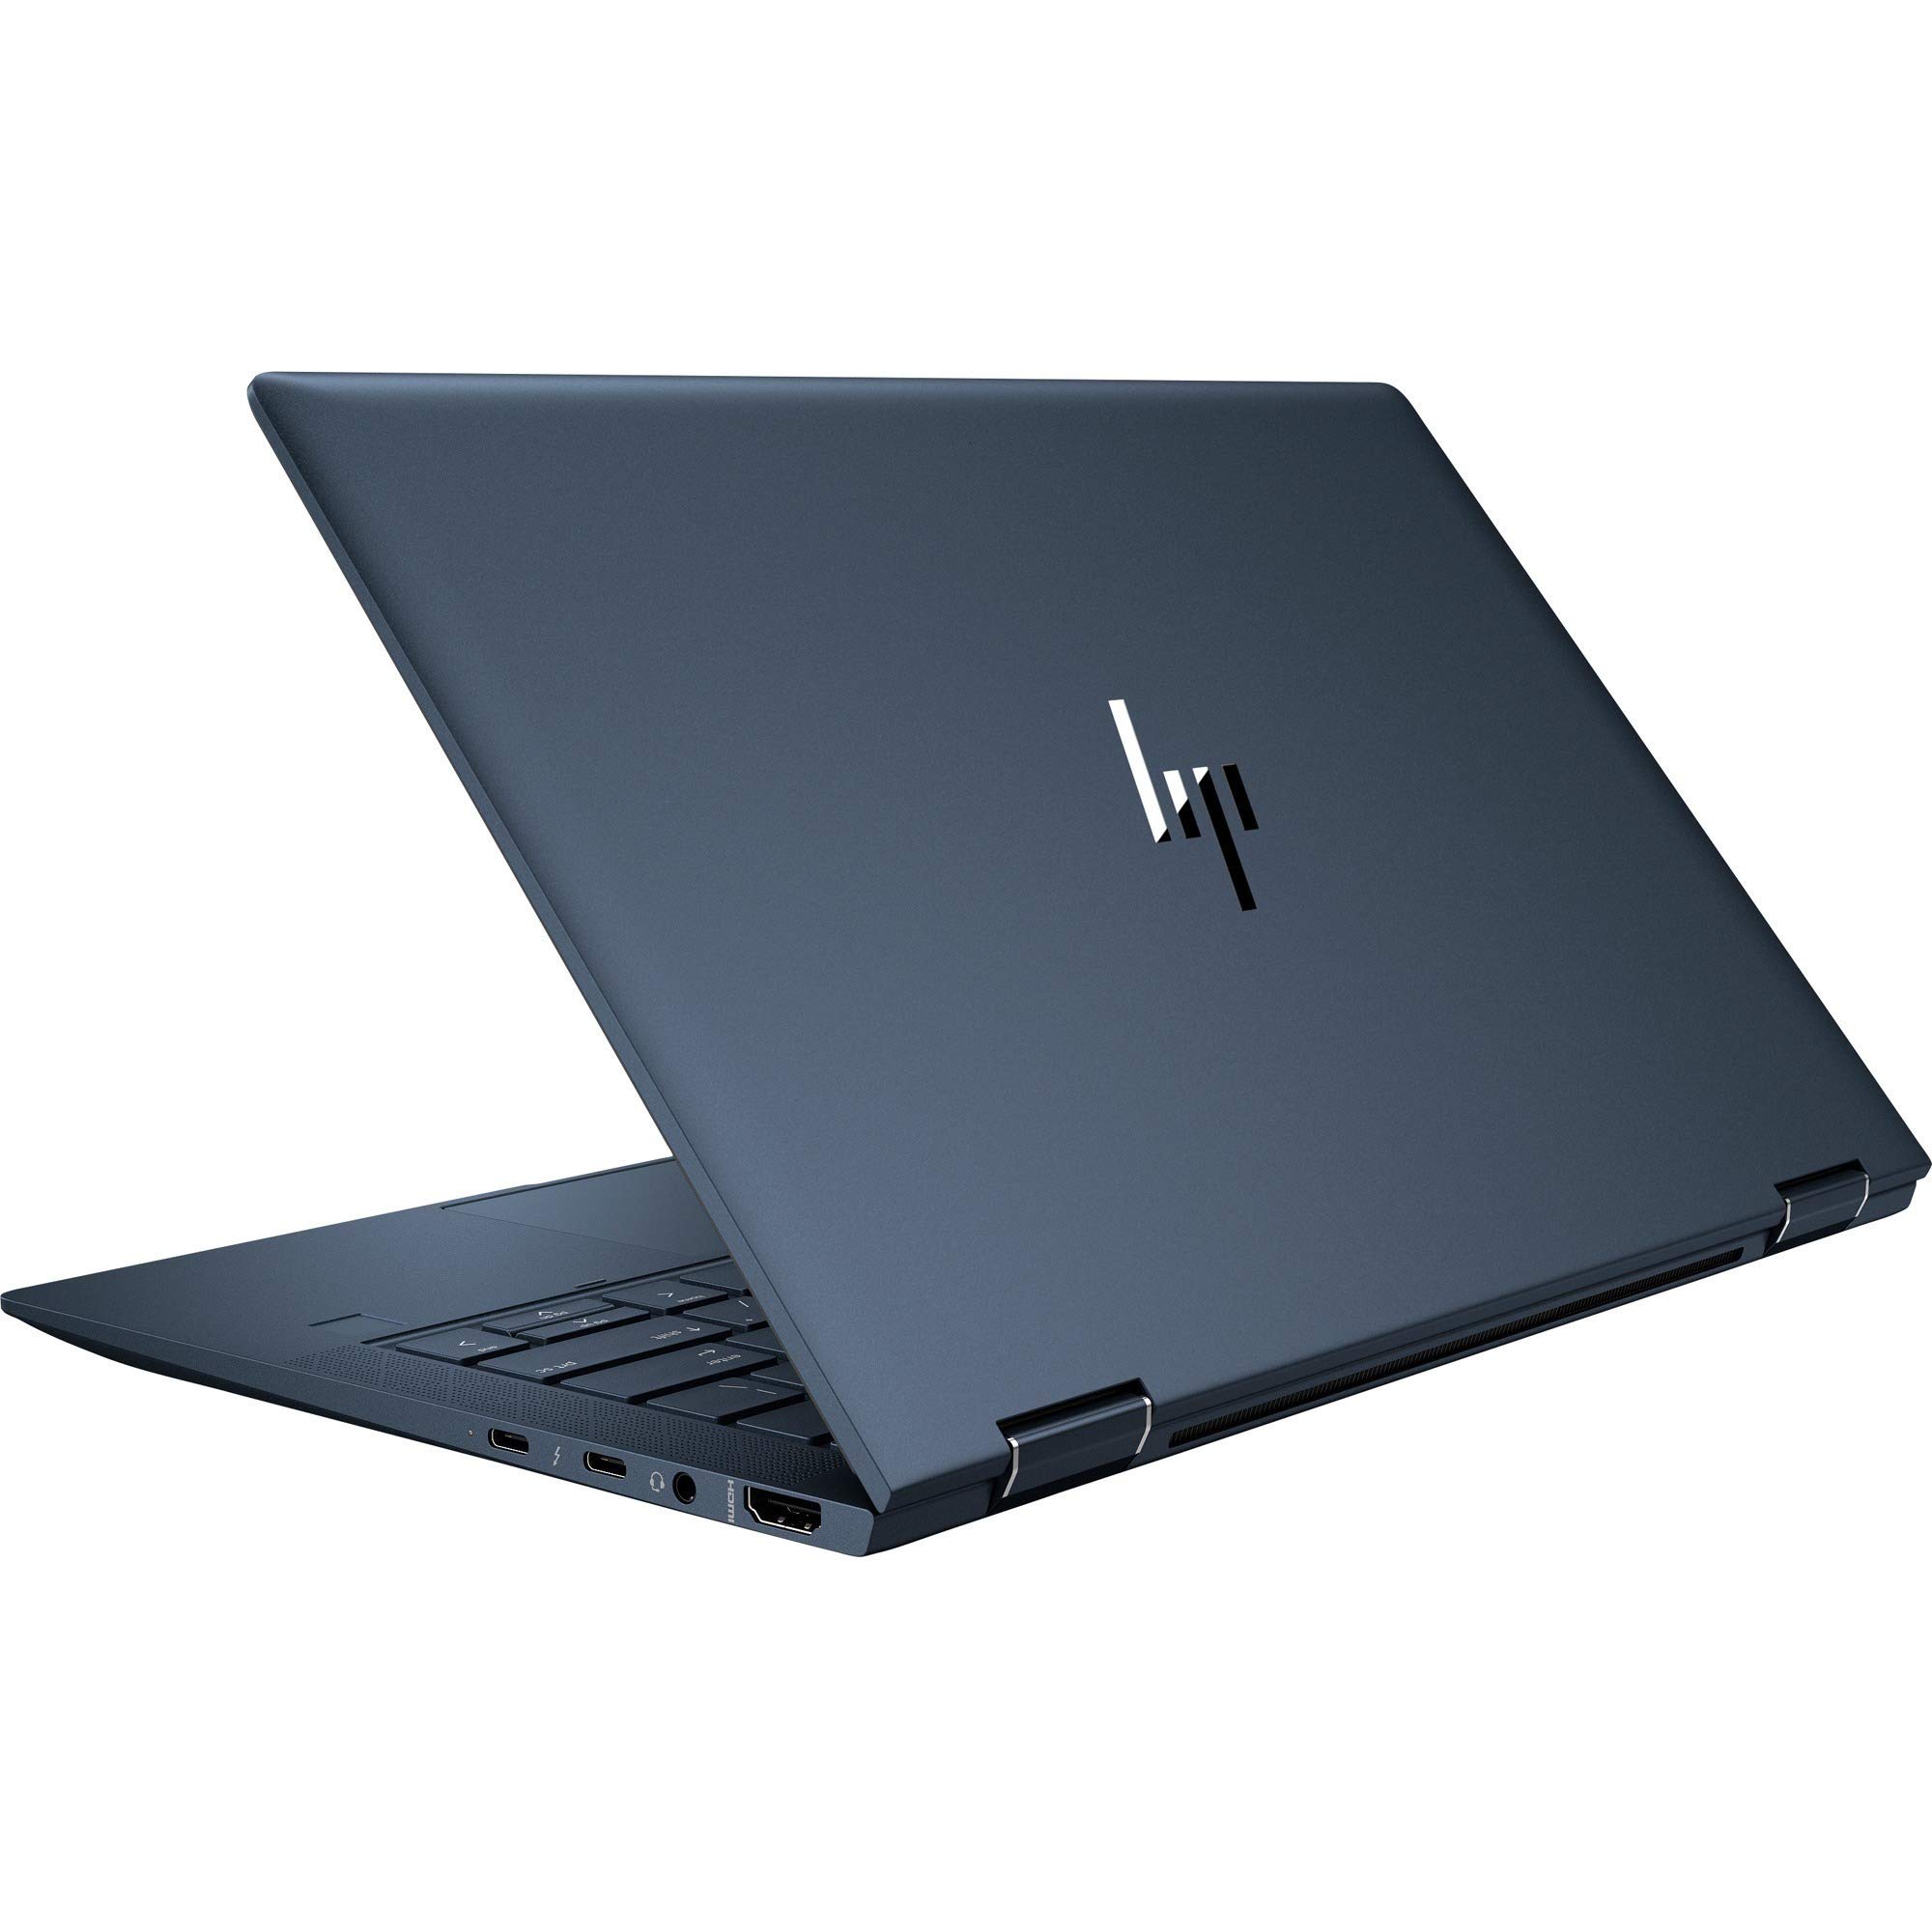 HP Elite Dragonfly Notebook PC